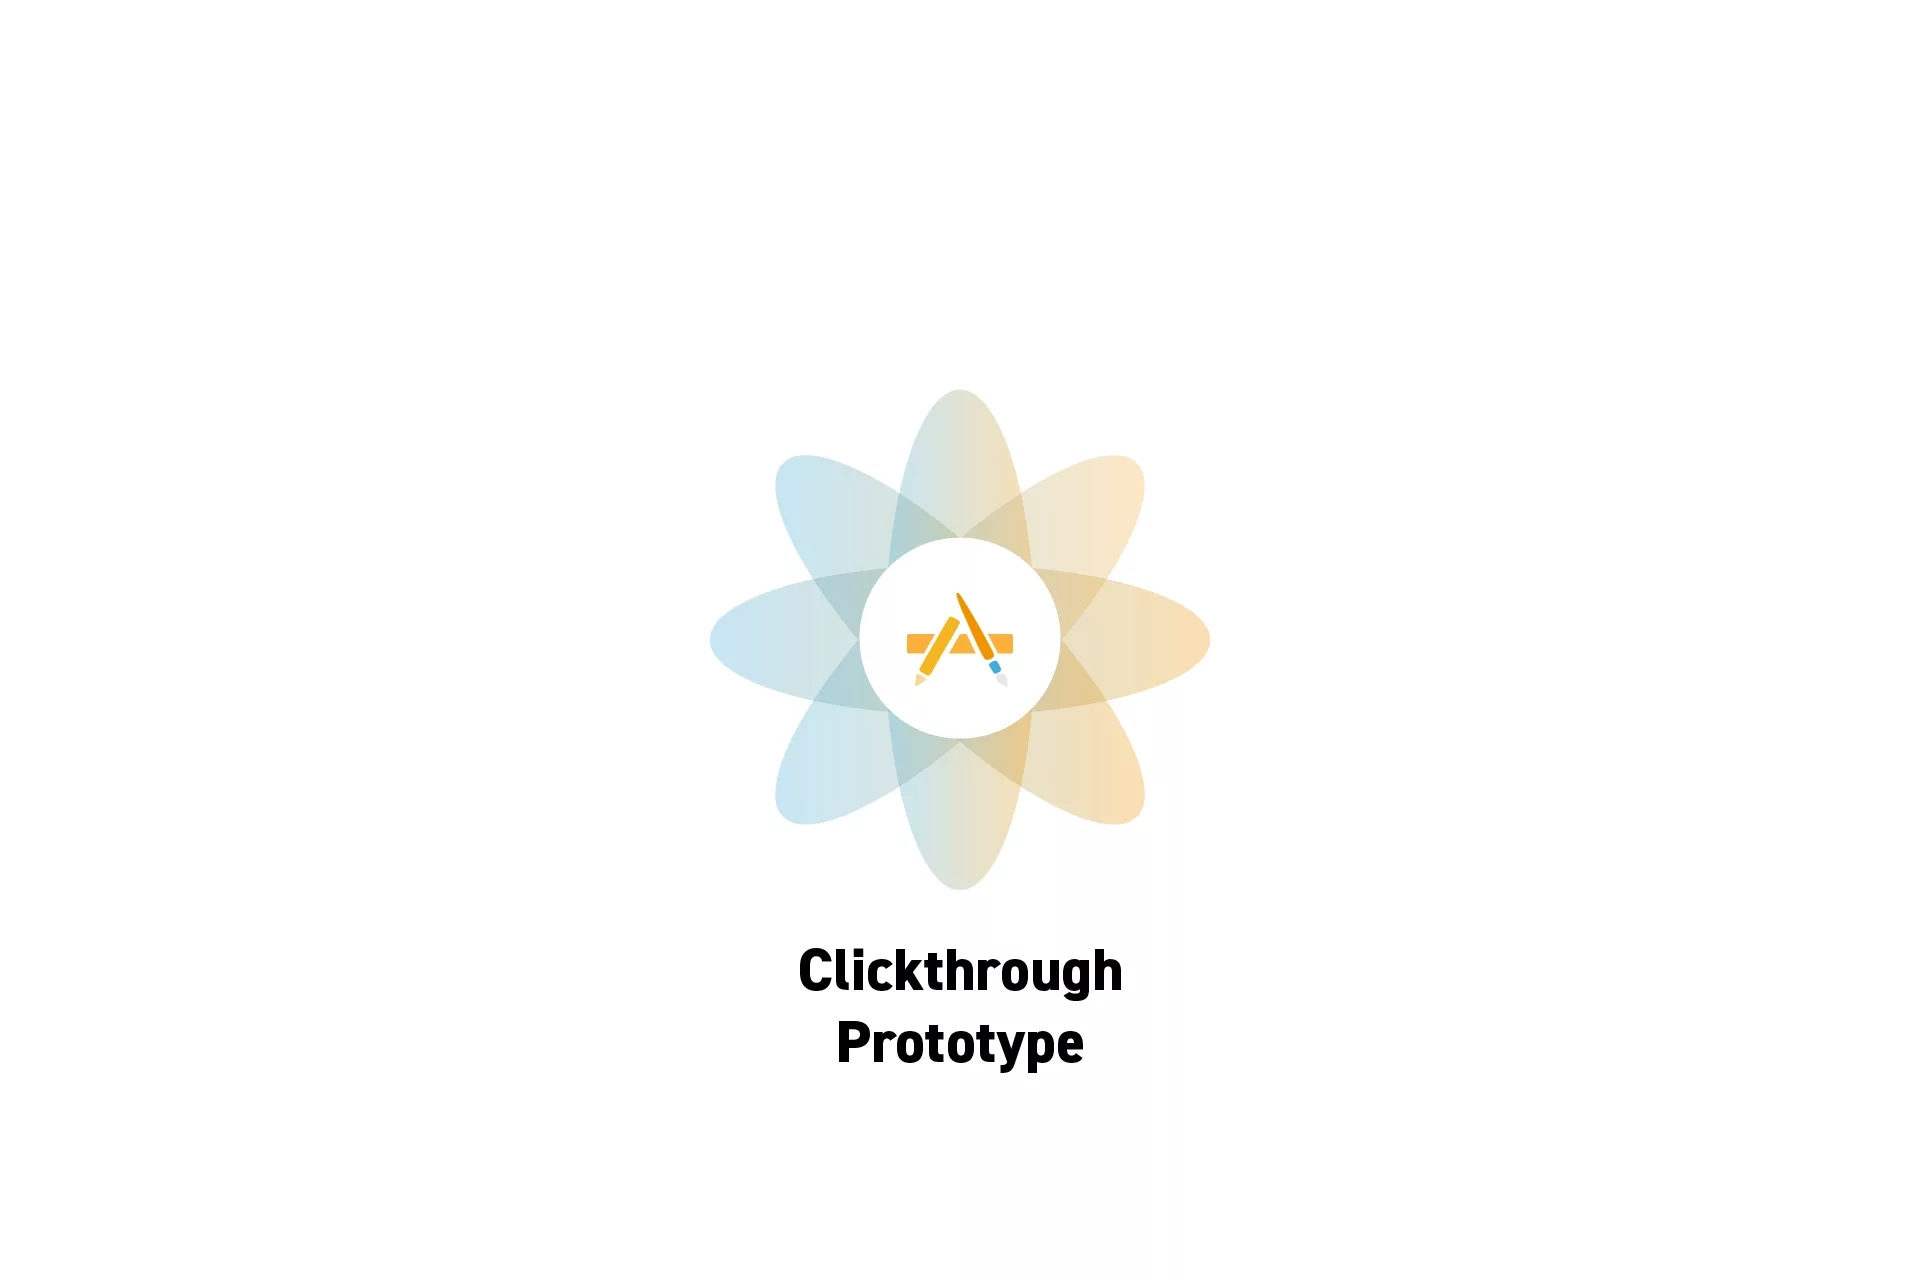 A flower that represents Digital Craft with the text “Clickthrough Prototype” beneath it.